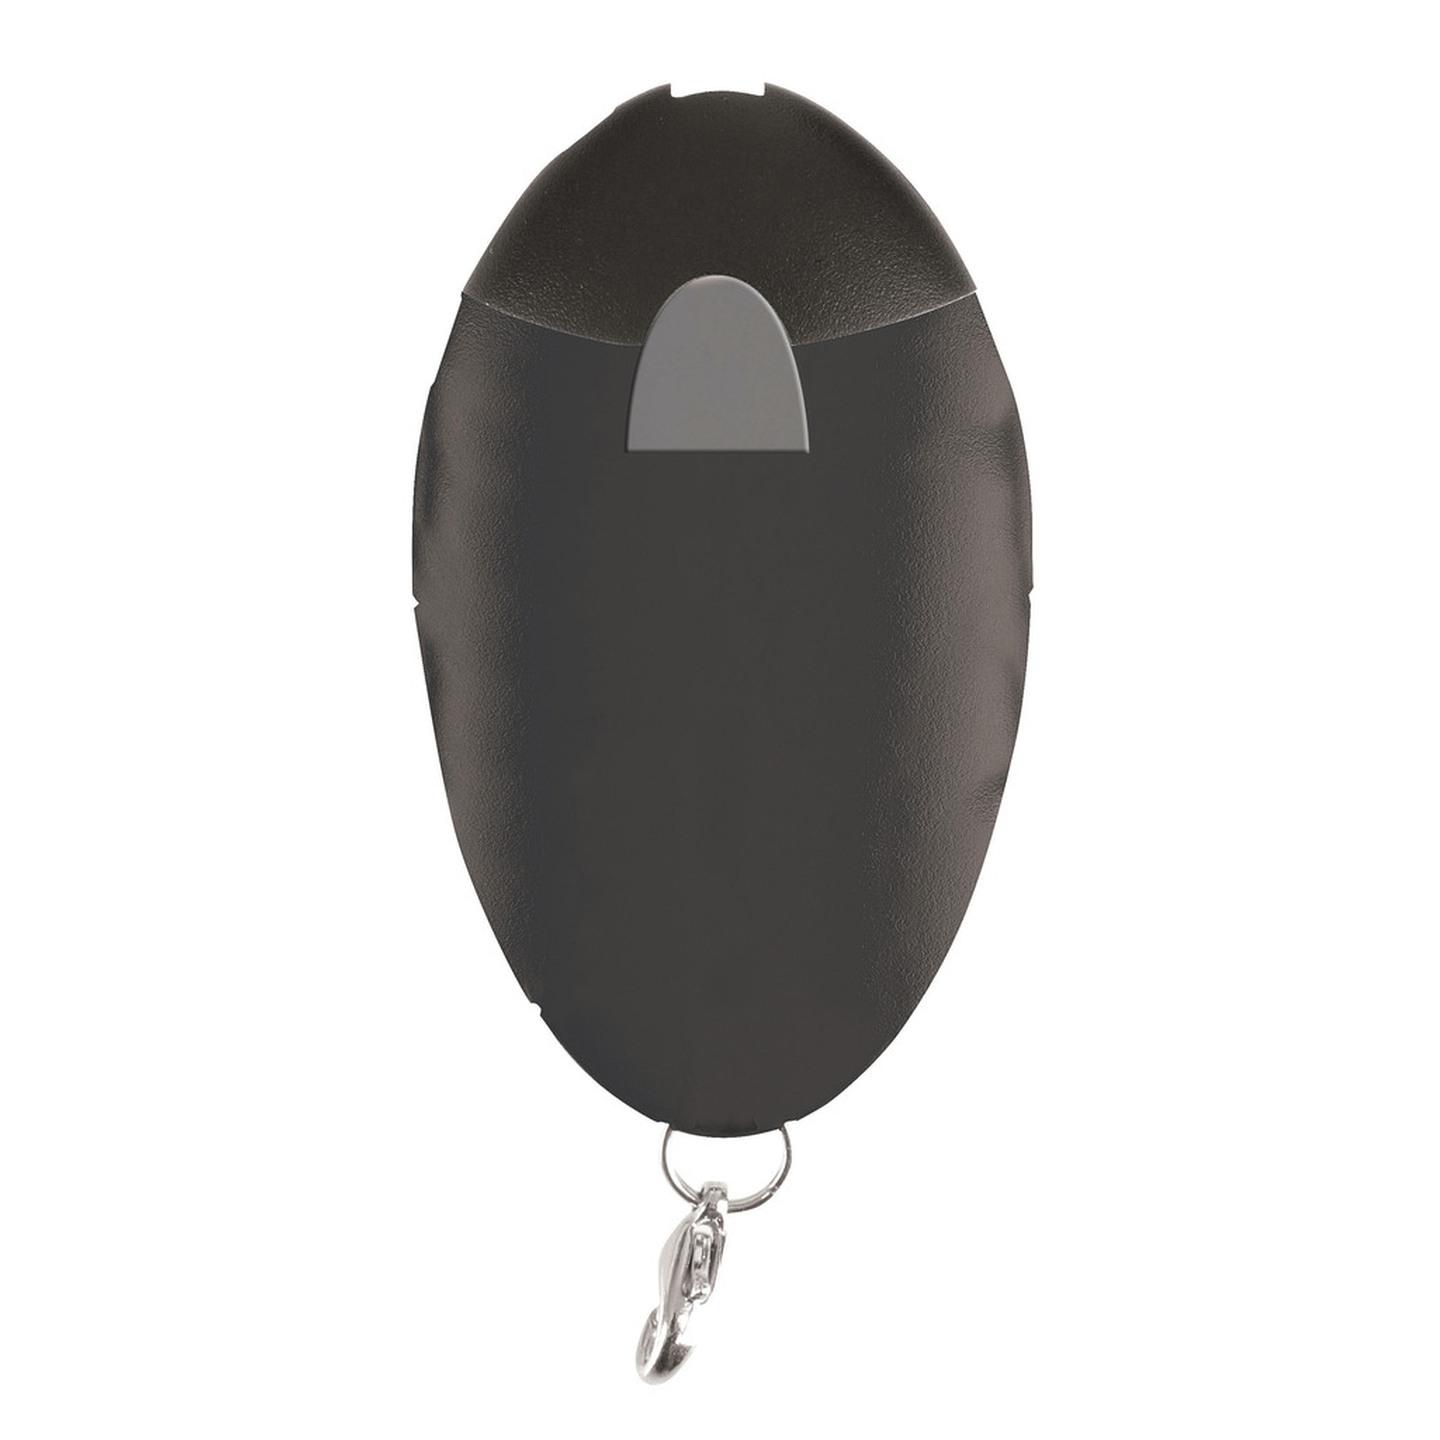 Bluetooth Keyring Locator with App for iPhone